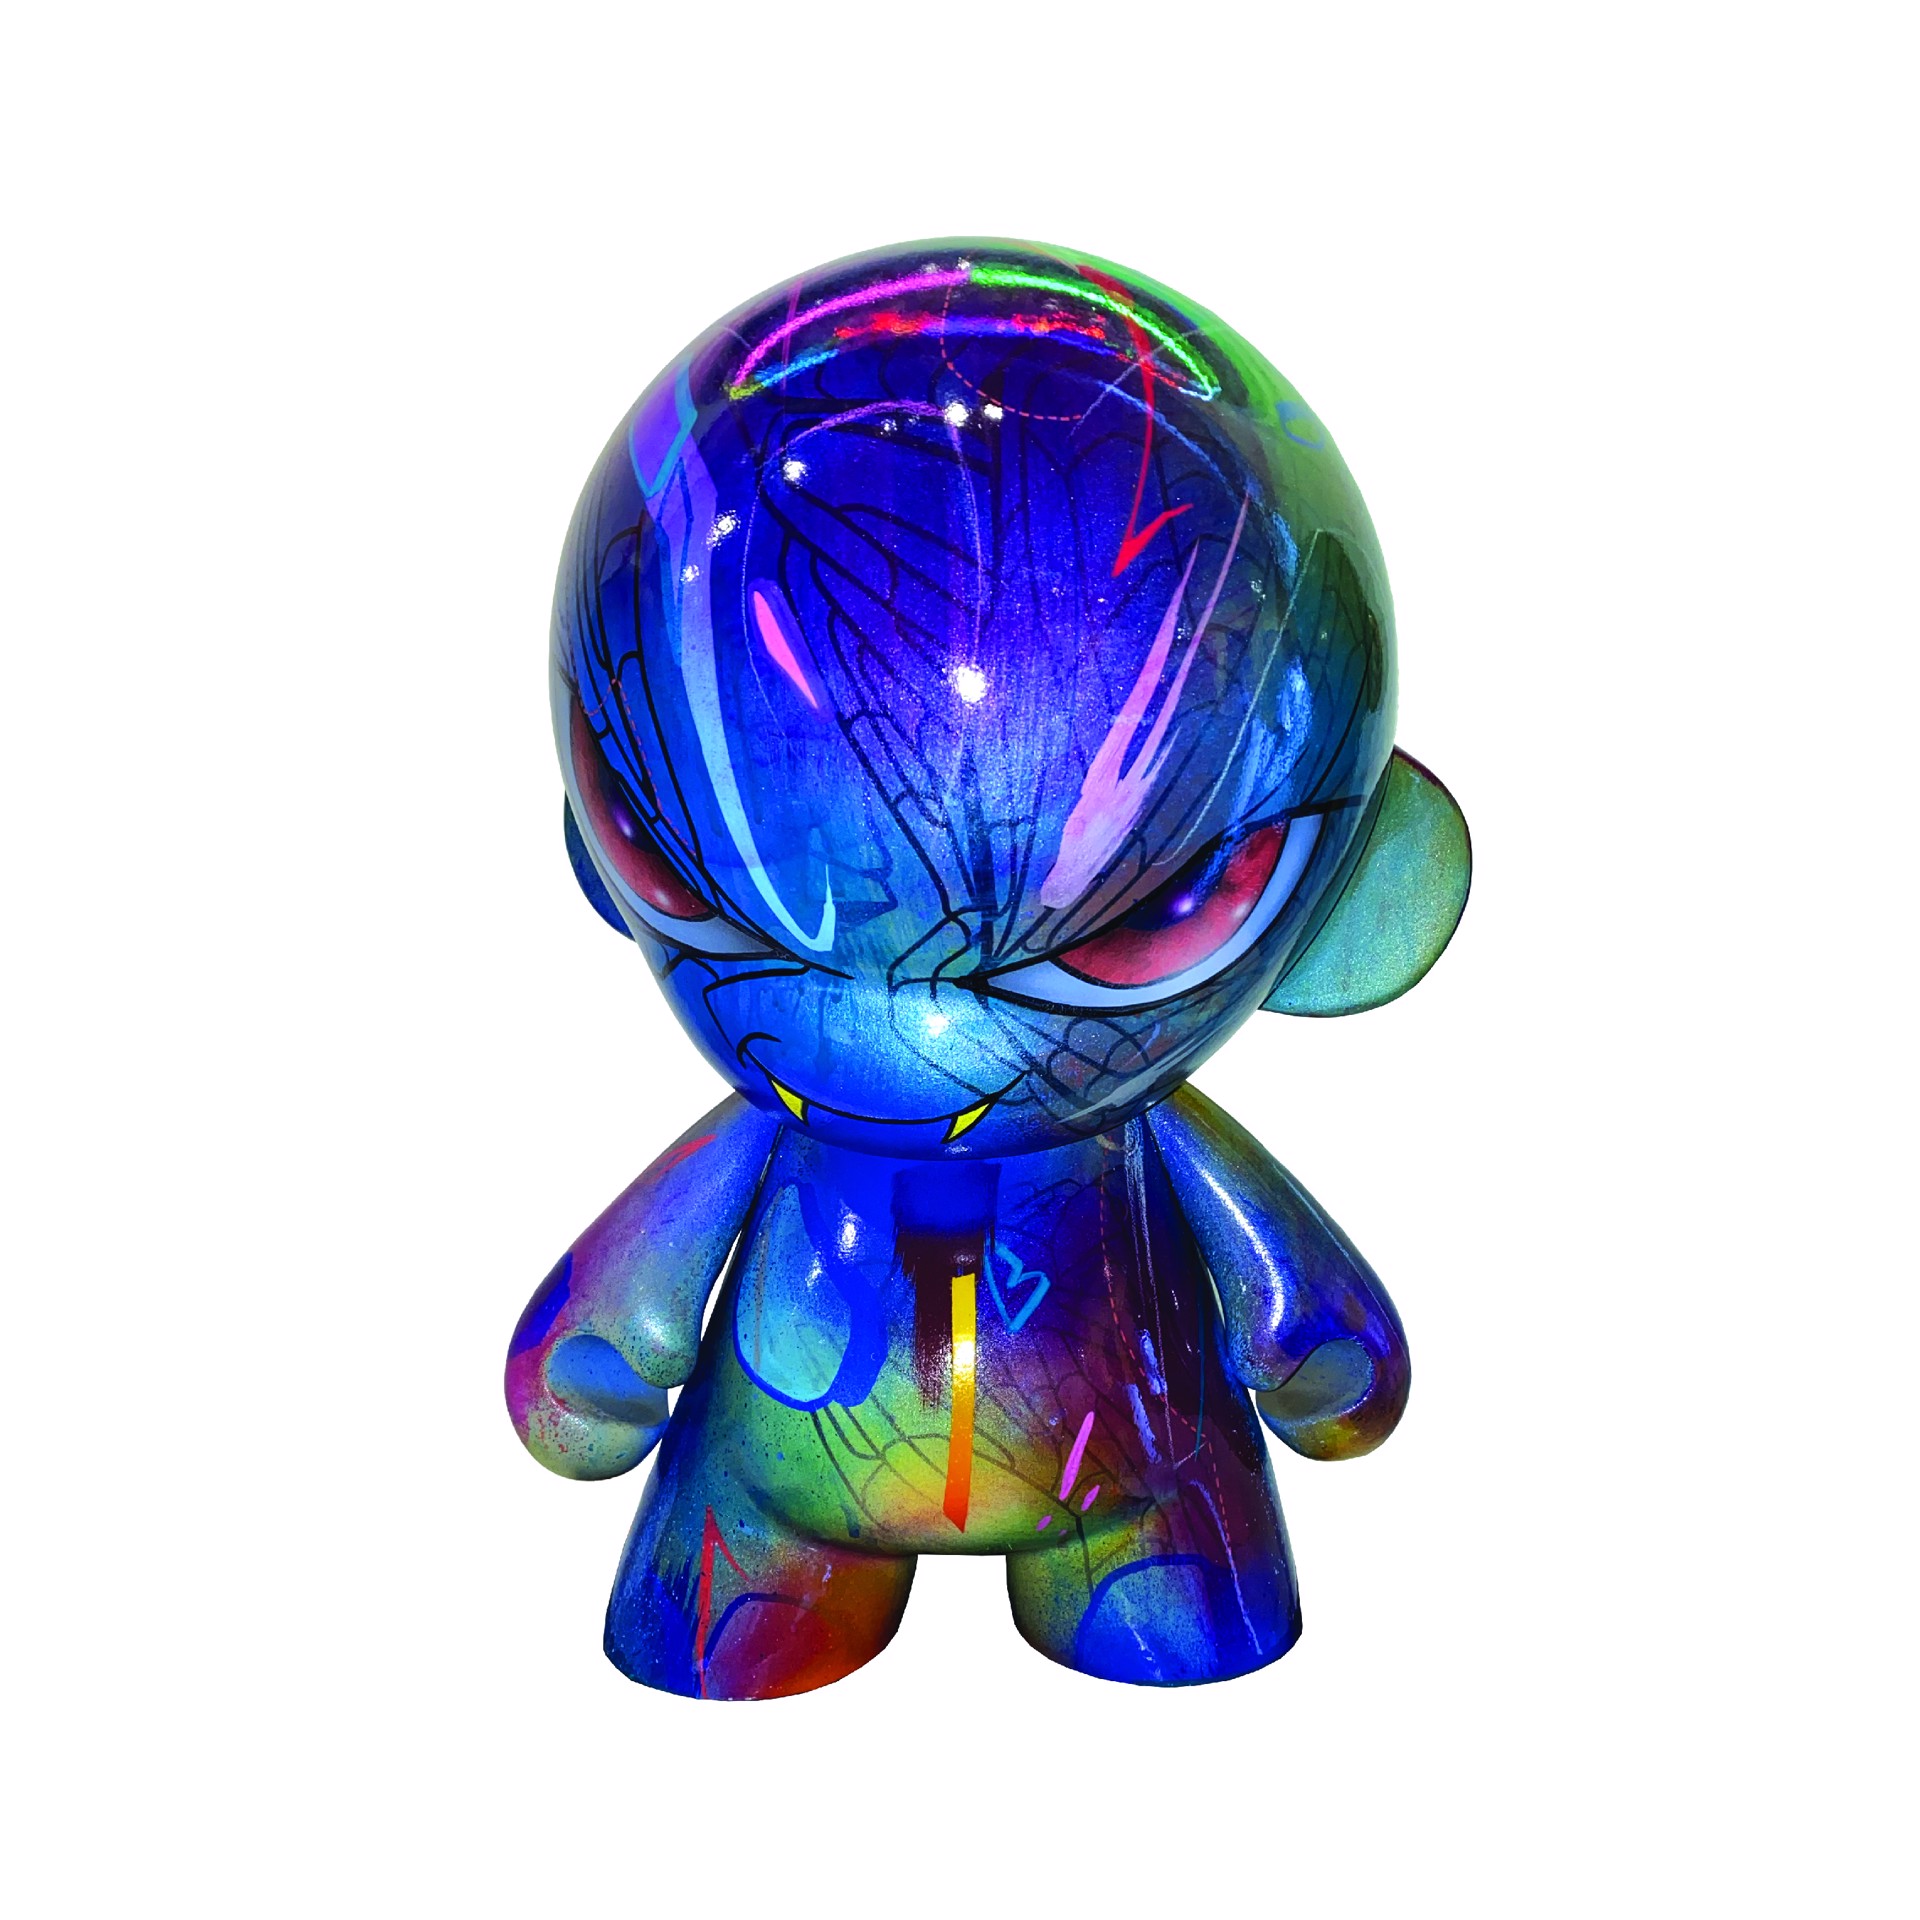 Untitled MUNNY by Abstrk